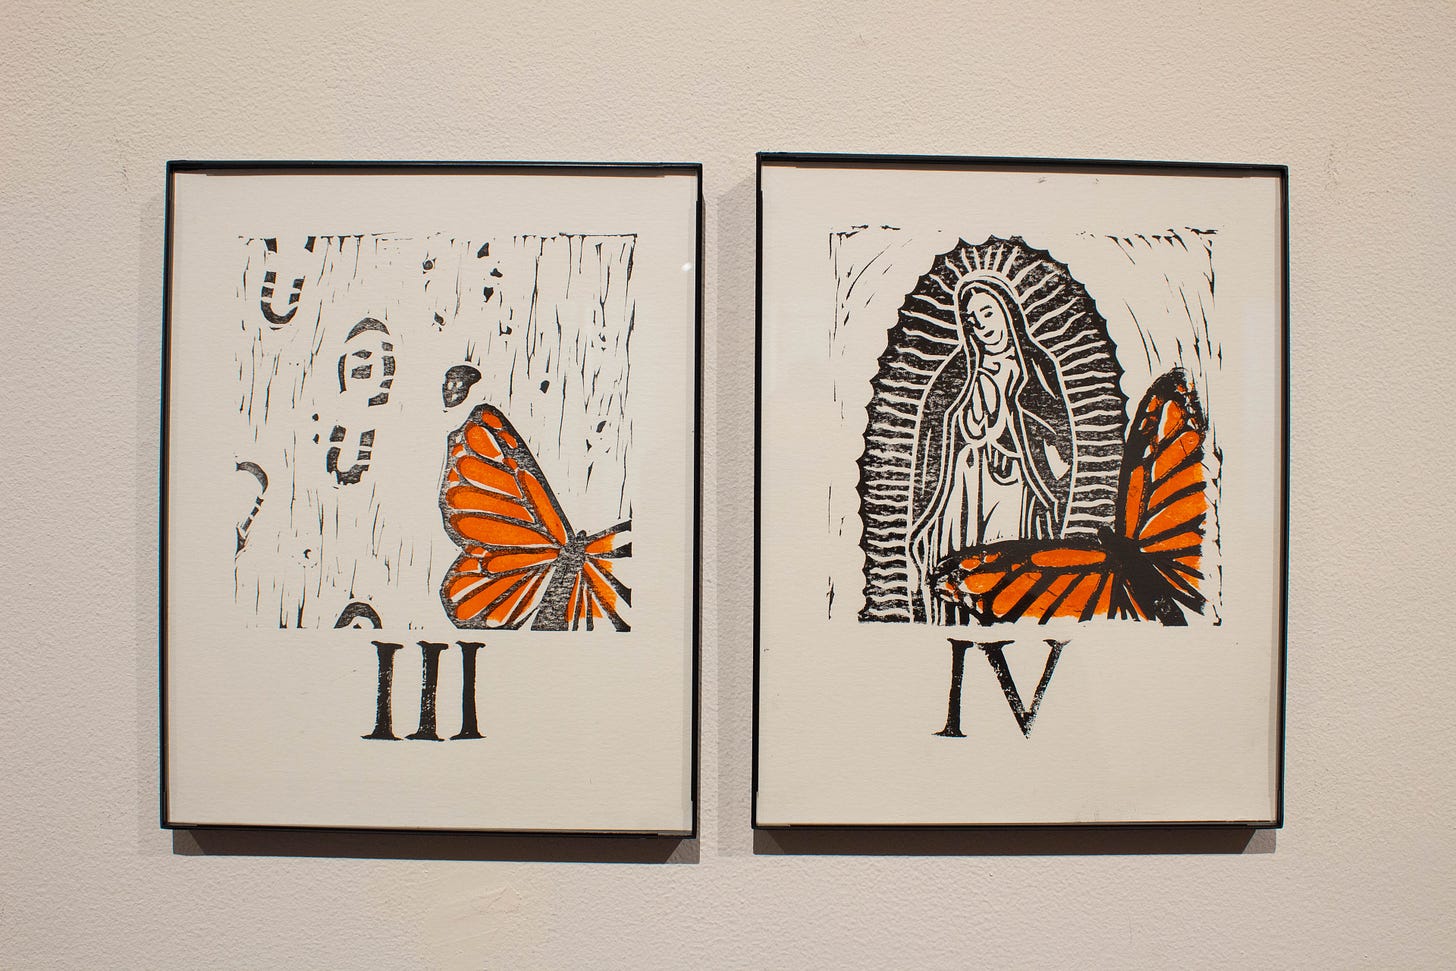 Two framed prints on a wall. One shoes footprints with a fallen monarch butterfly on the path. The second shows a Virgin Mary figure with the butterfly landing on it.